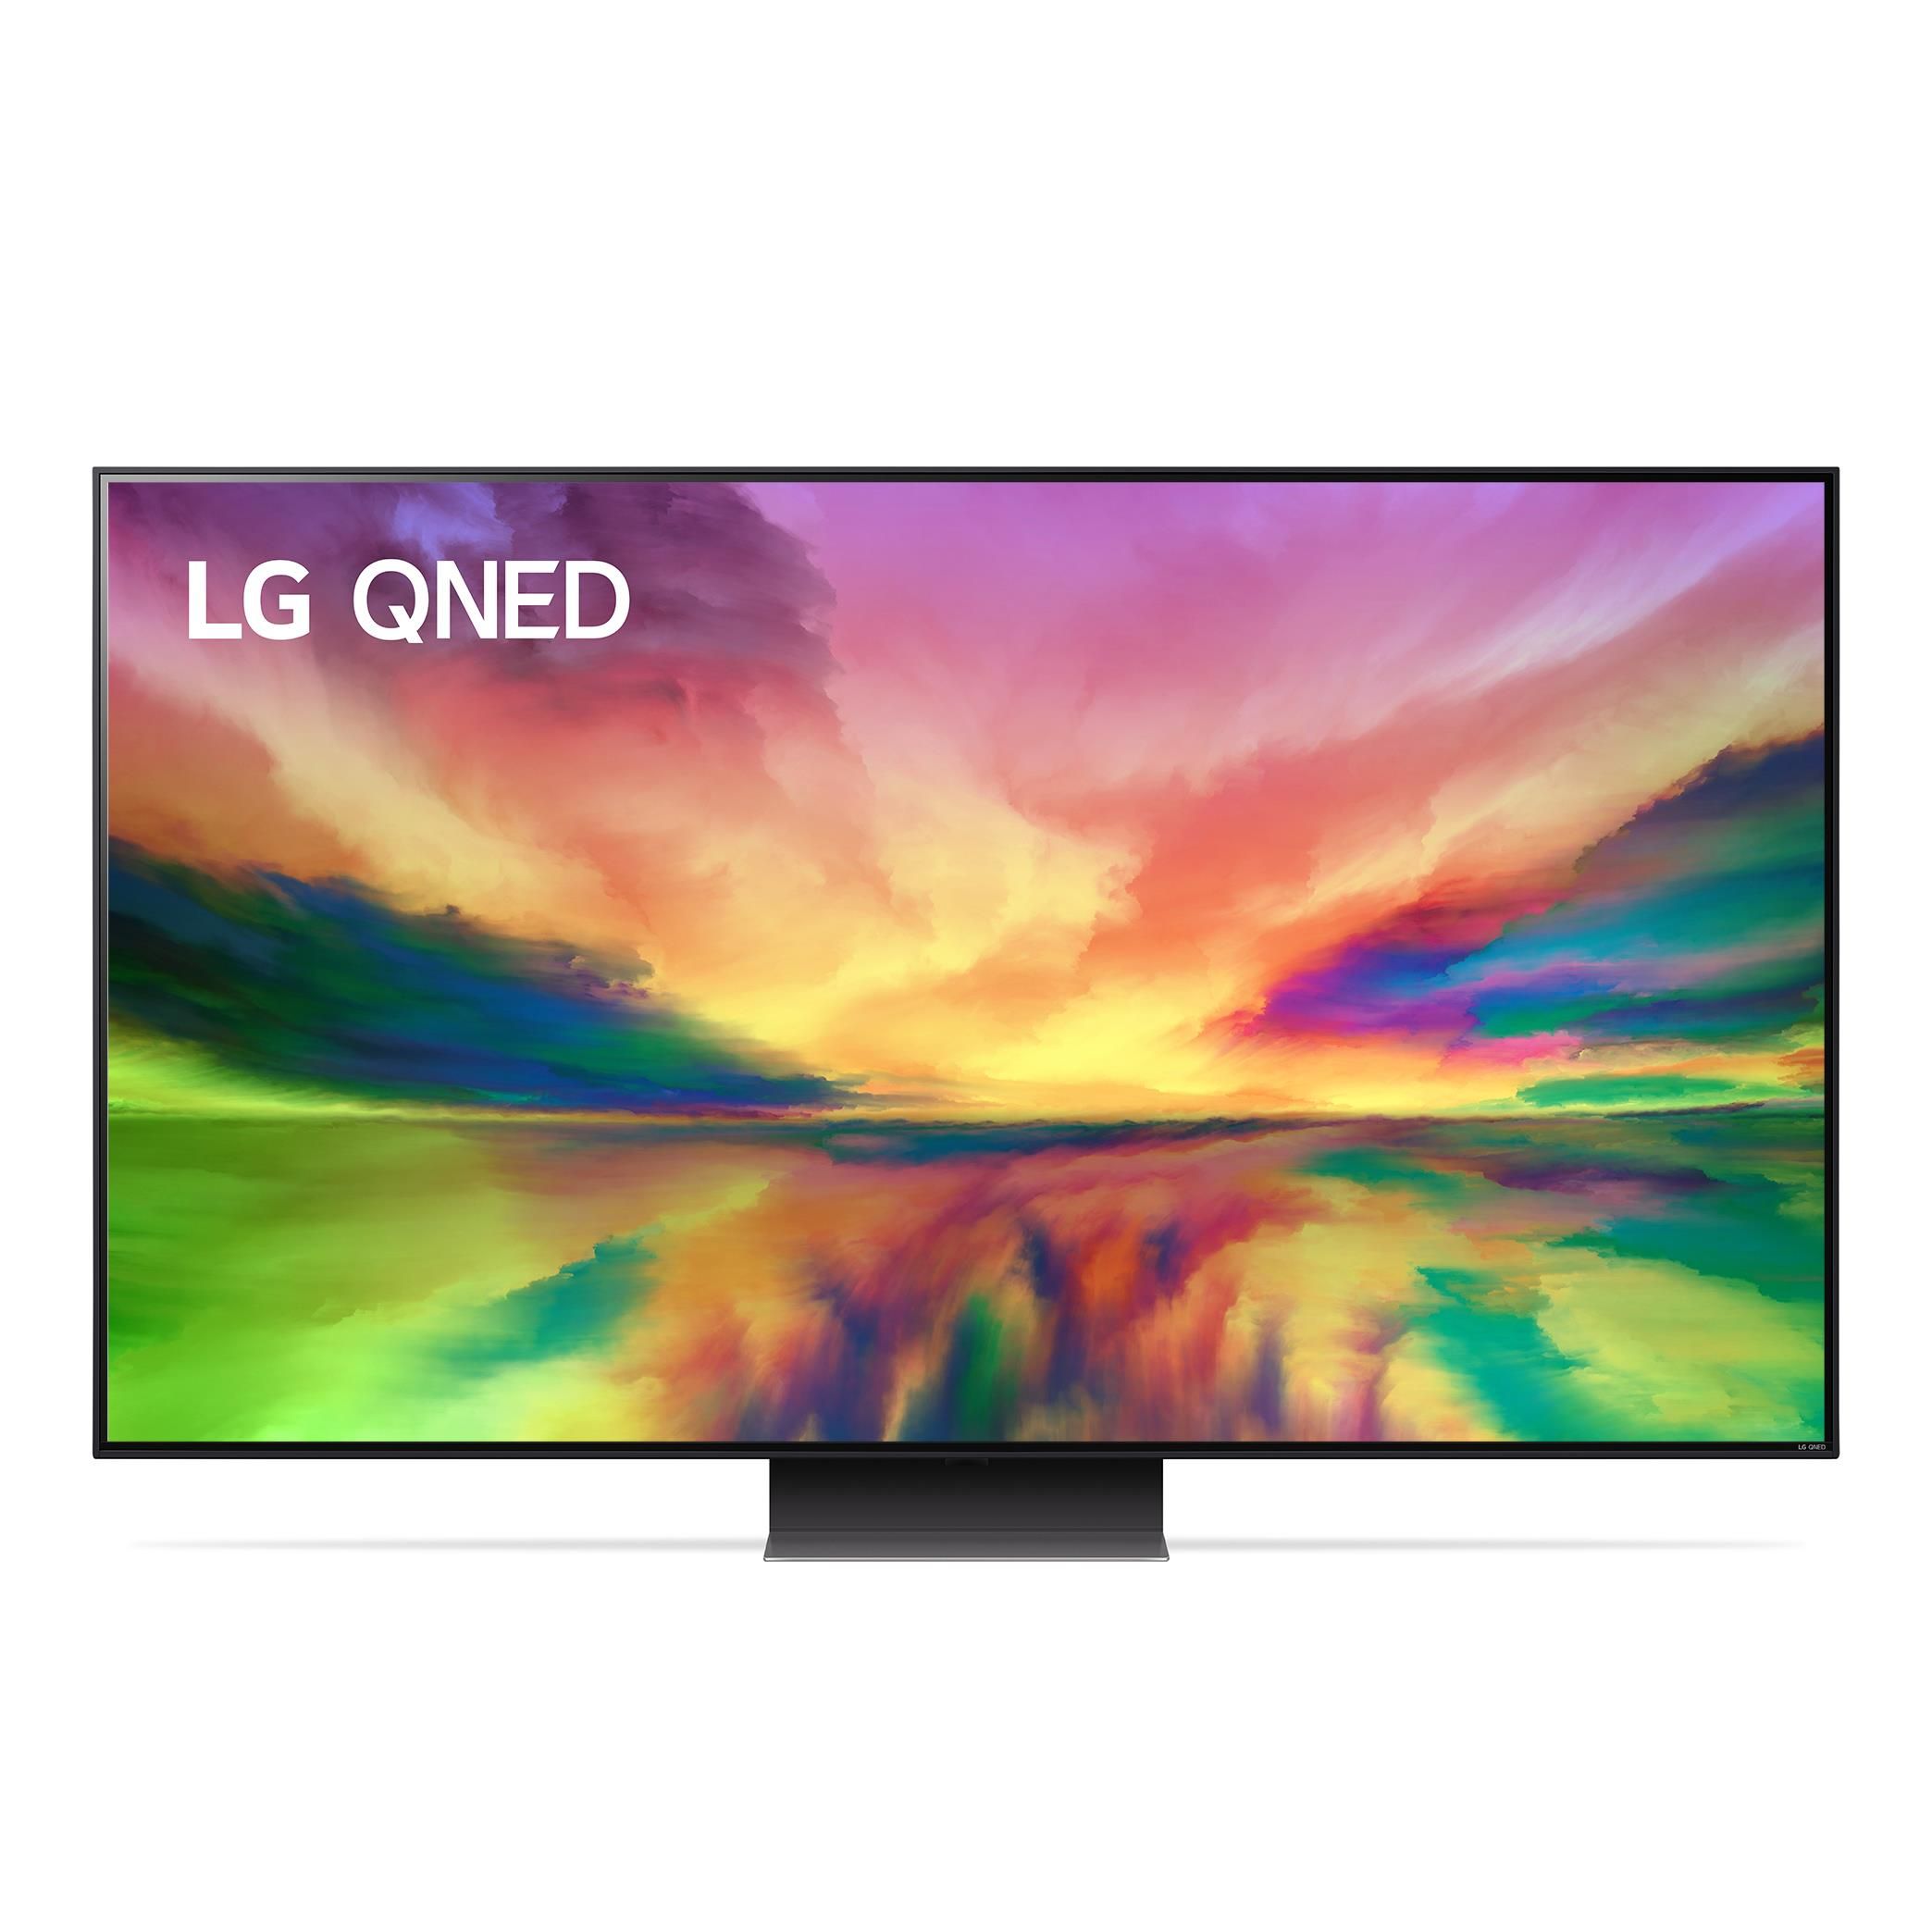 LG QNED 75 Serie